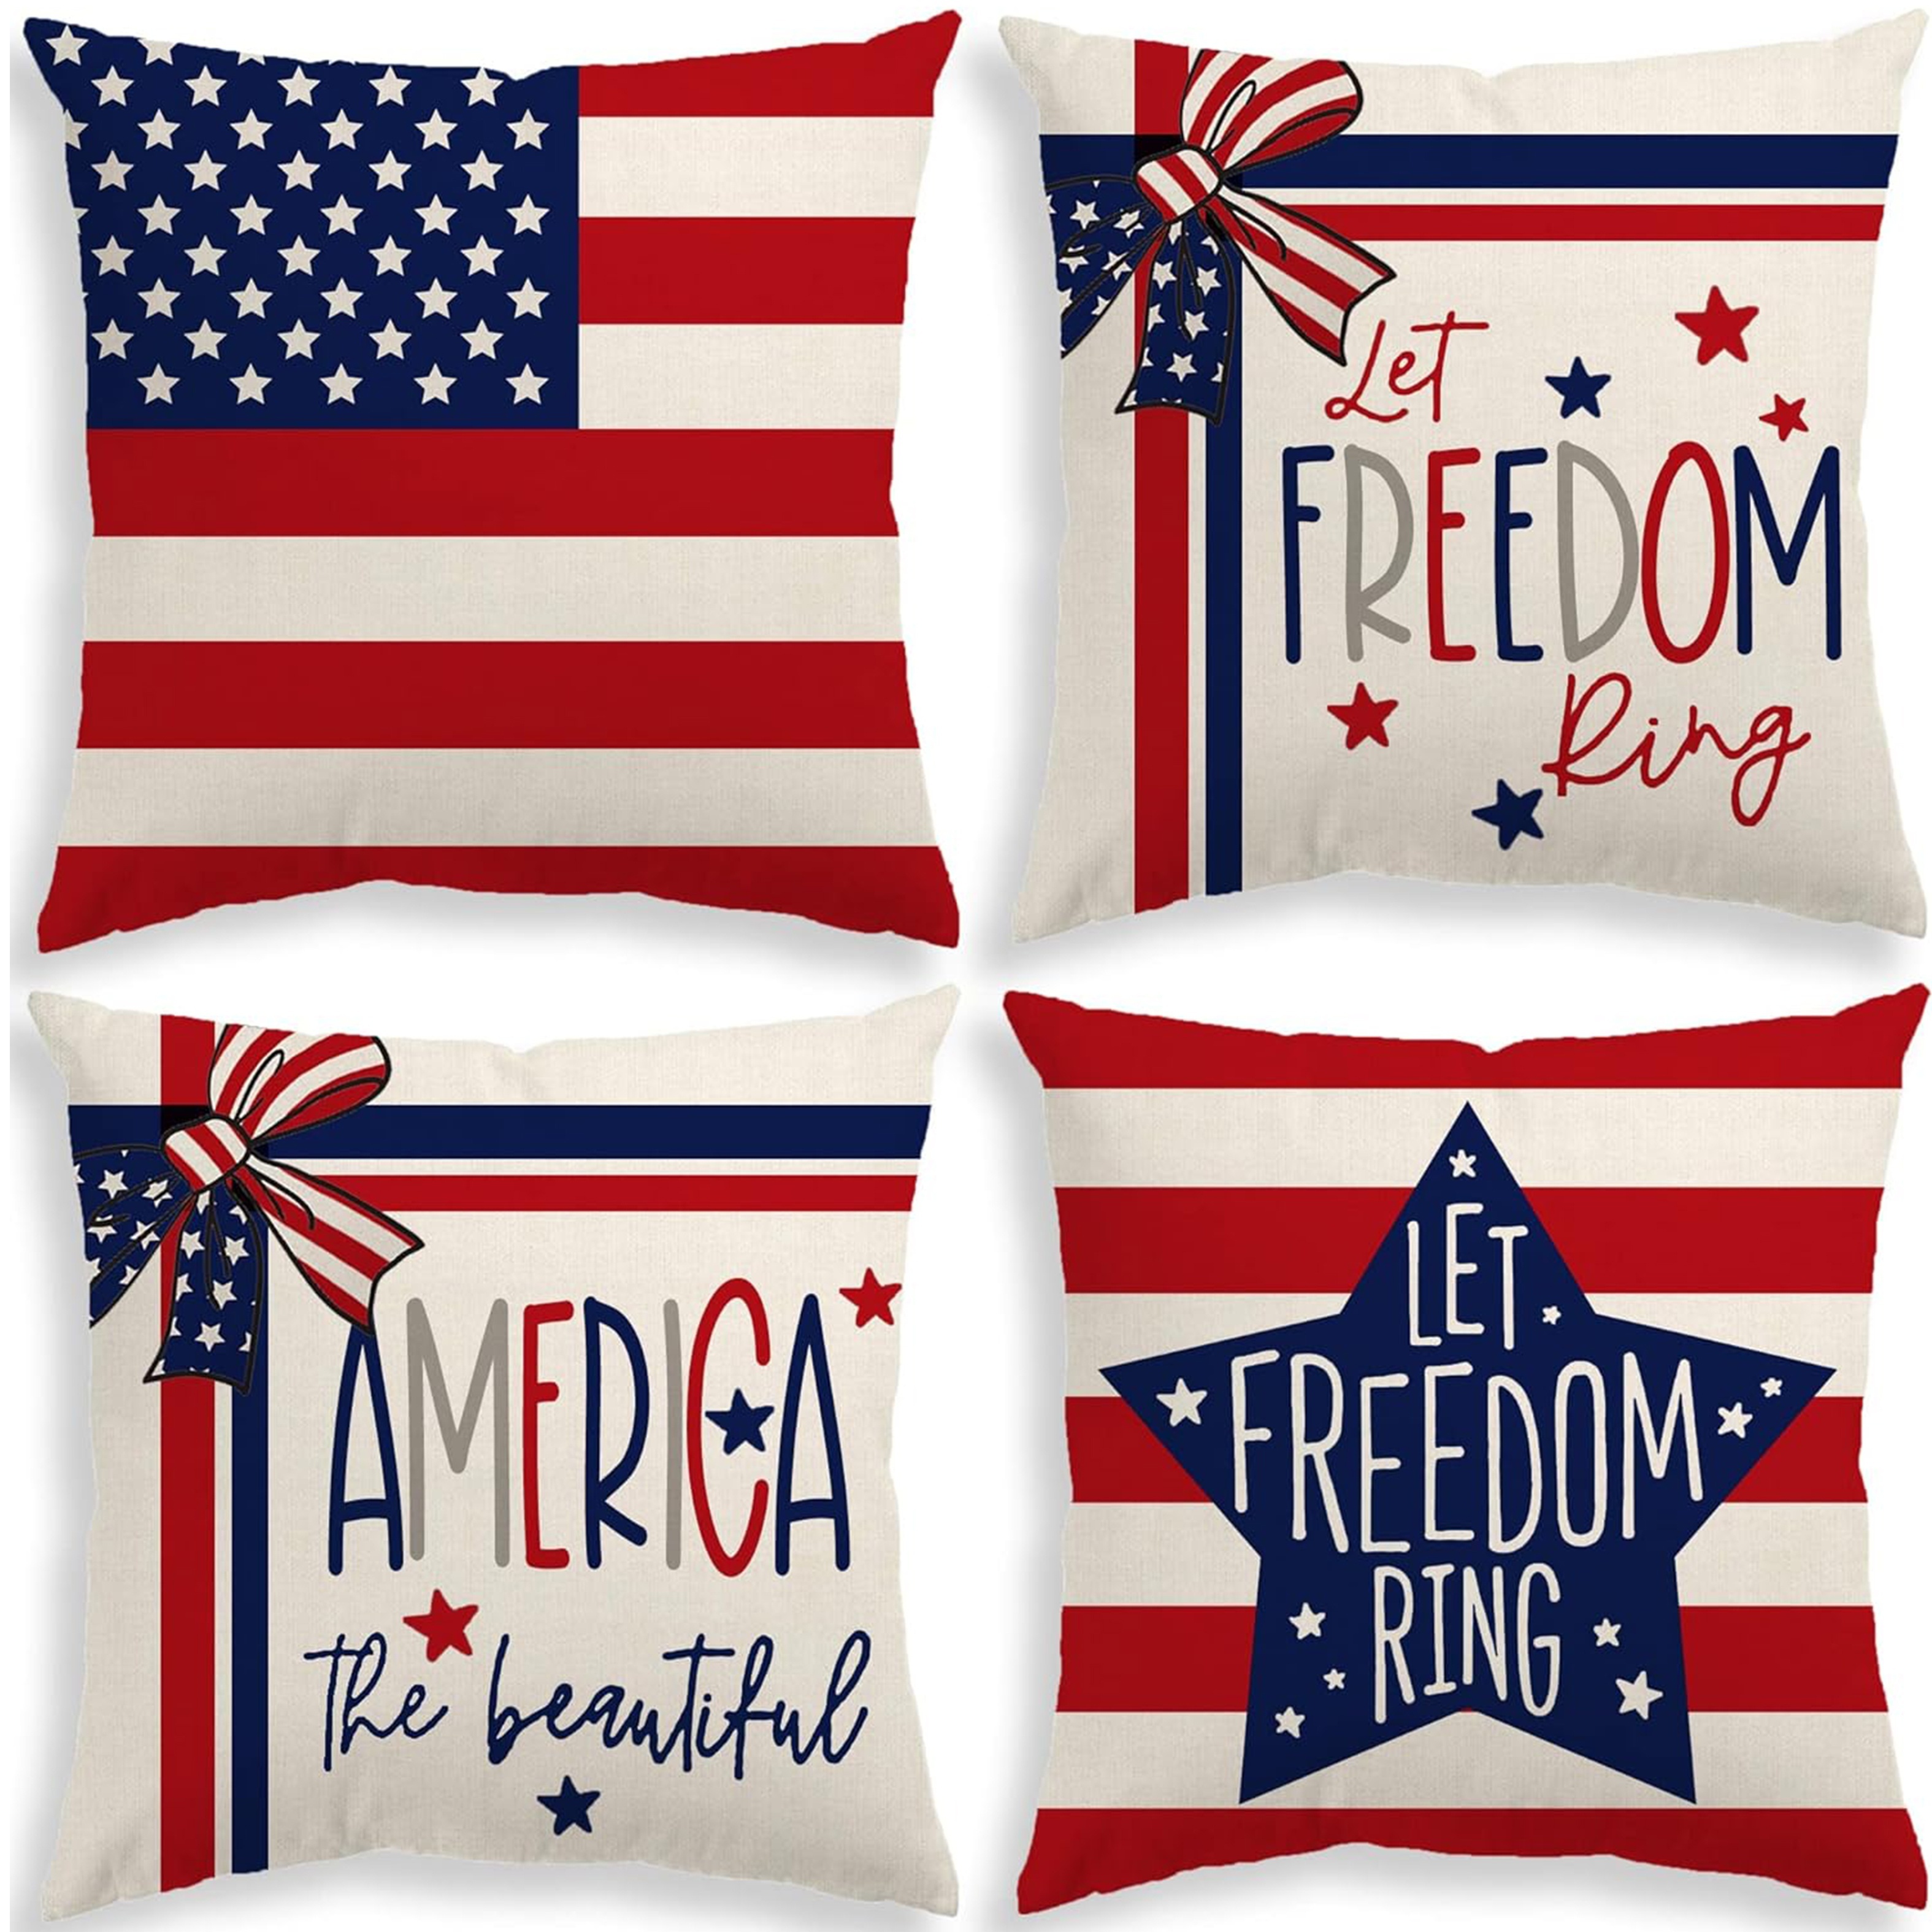 

4pcs, 20x20 Inches Rustic Vintage Americana 4th Of July Decorative Pillow Covers, Patriotic Usa Day Usa Flag And Slogans Throw Cushion Cases, Festive Independence Day Home Decor